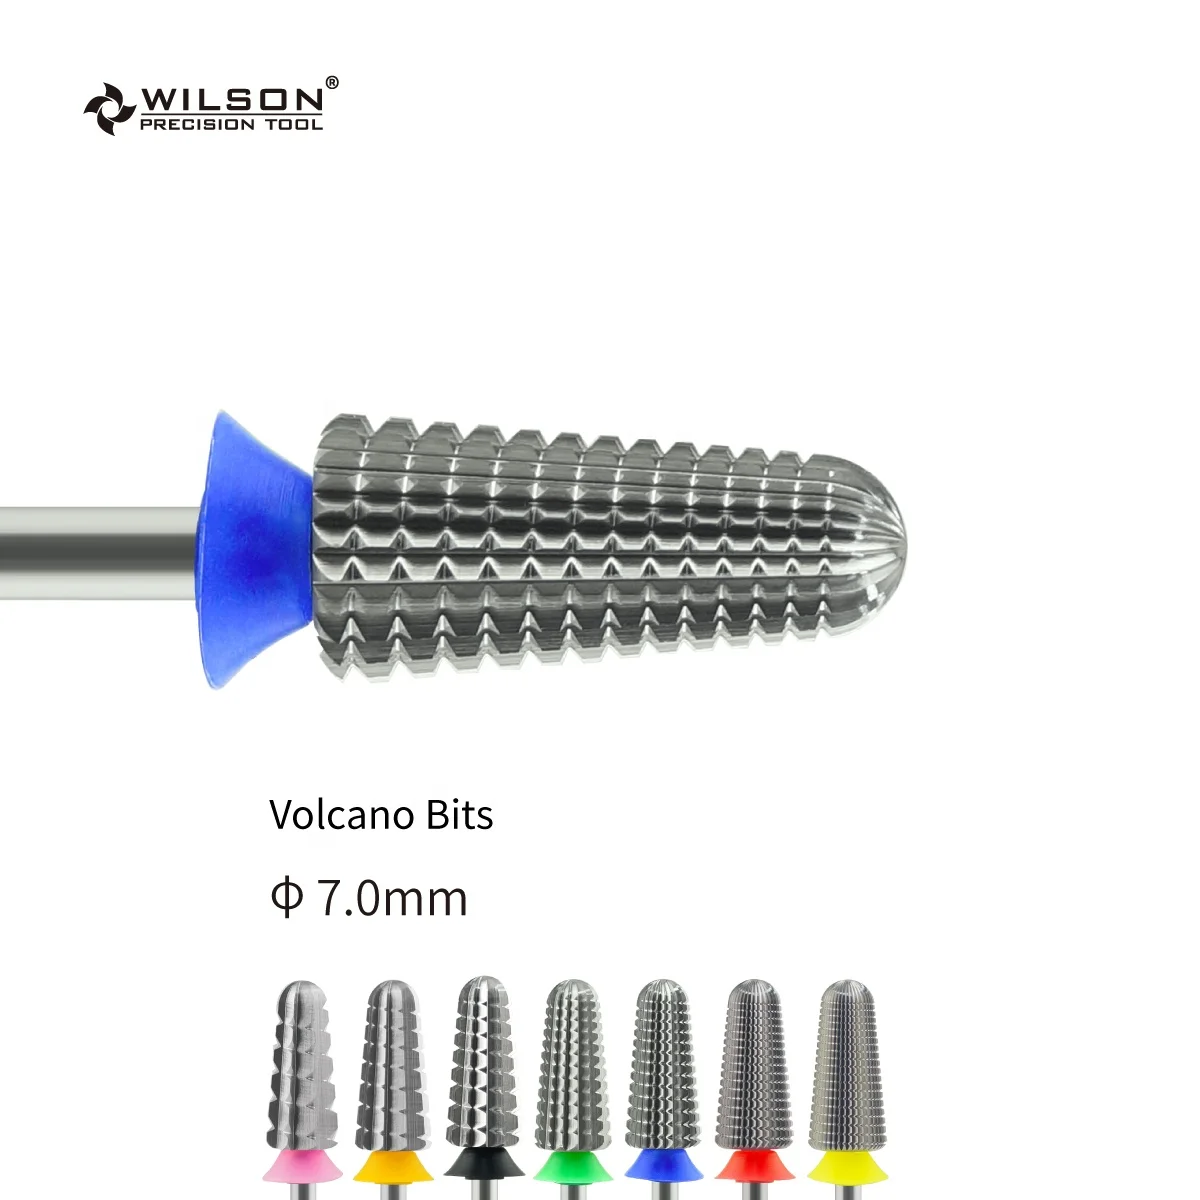 

RTS/Volcano Bits/ Uncoated nail bit Shank 25.4mm WILSON Multiple Efficient manicure Gel Removal 2.35mm carbide nail bit